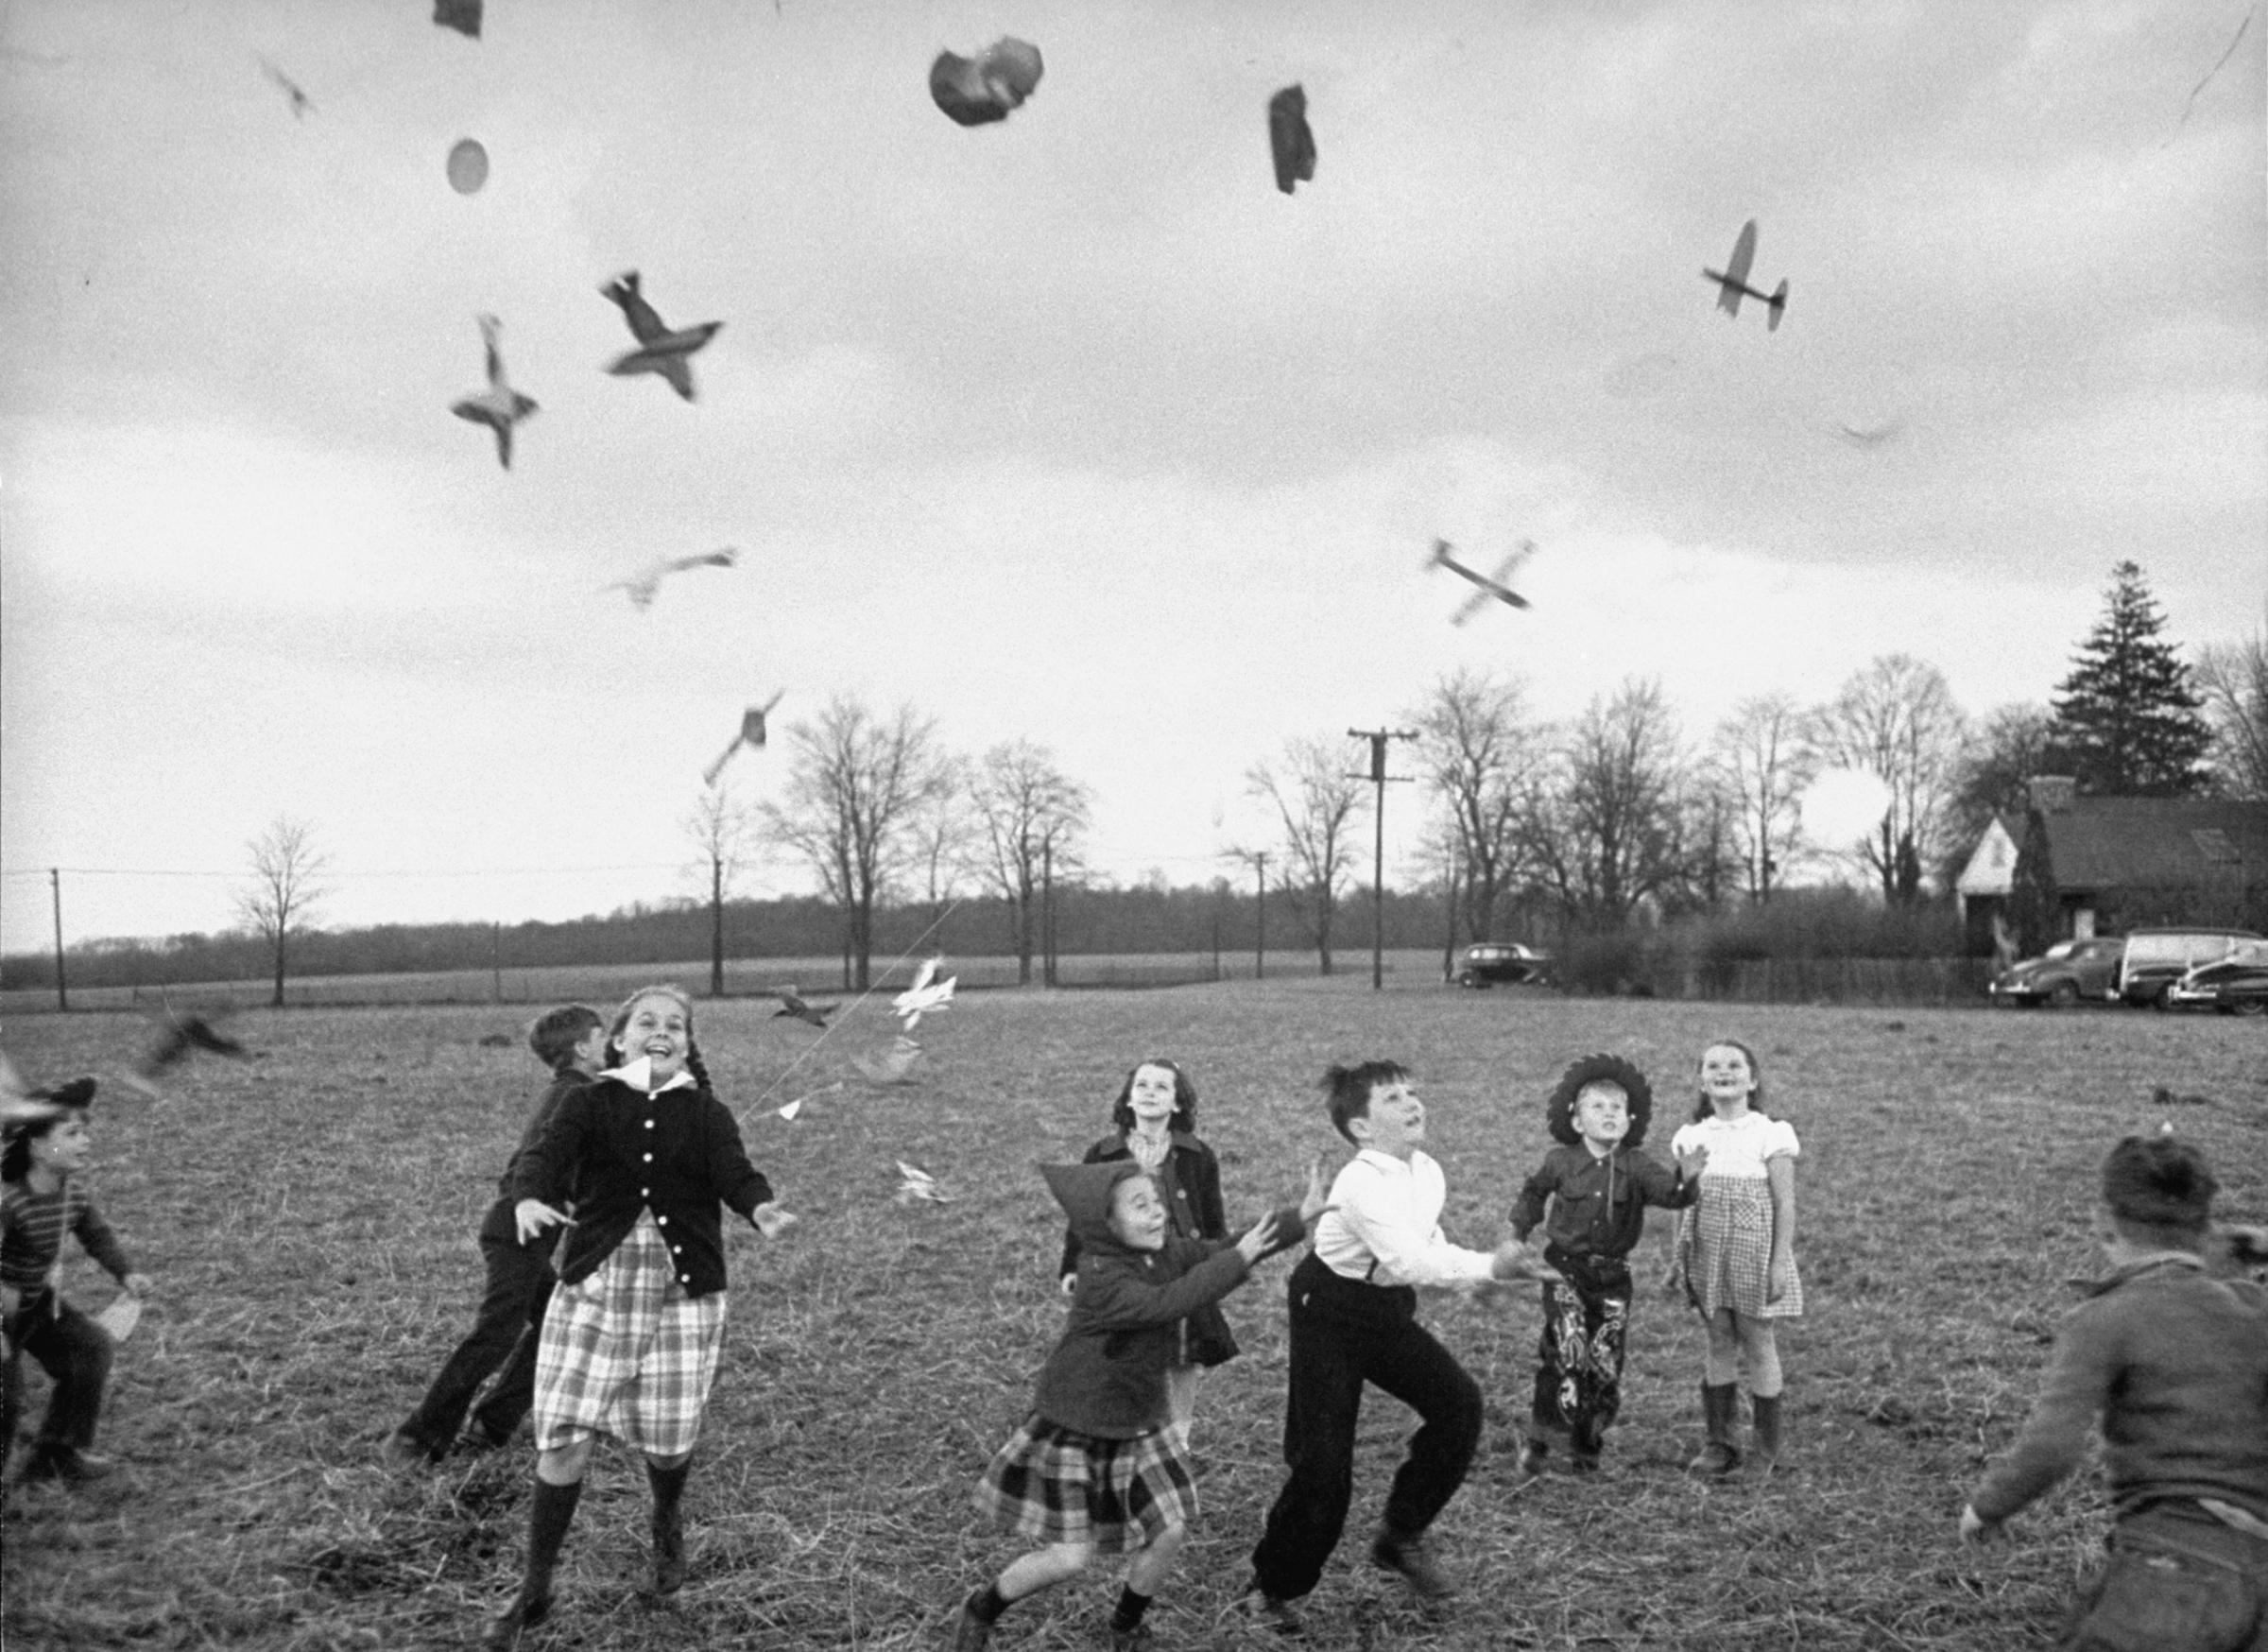 Children try to catch toys that were released by a kite, 1949.